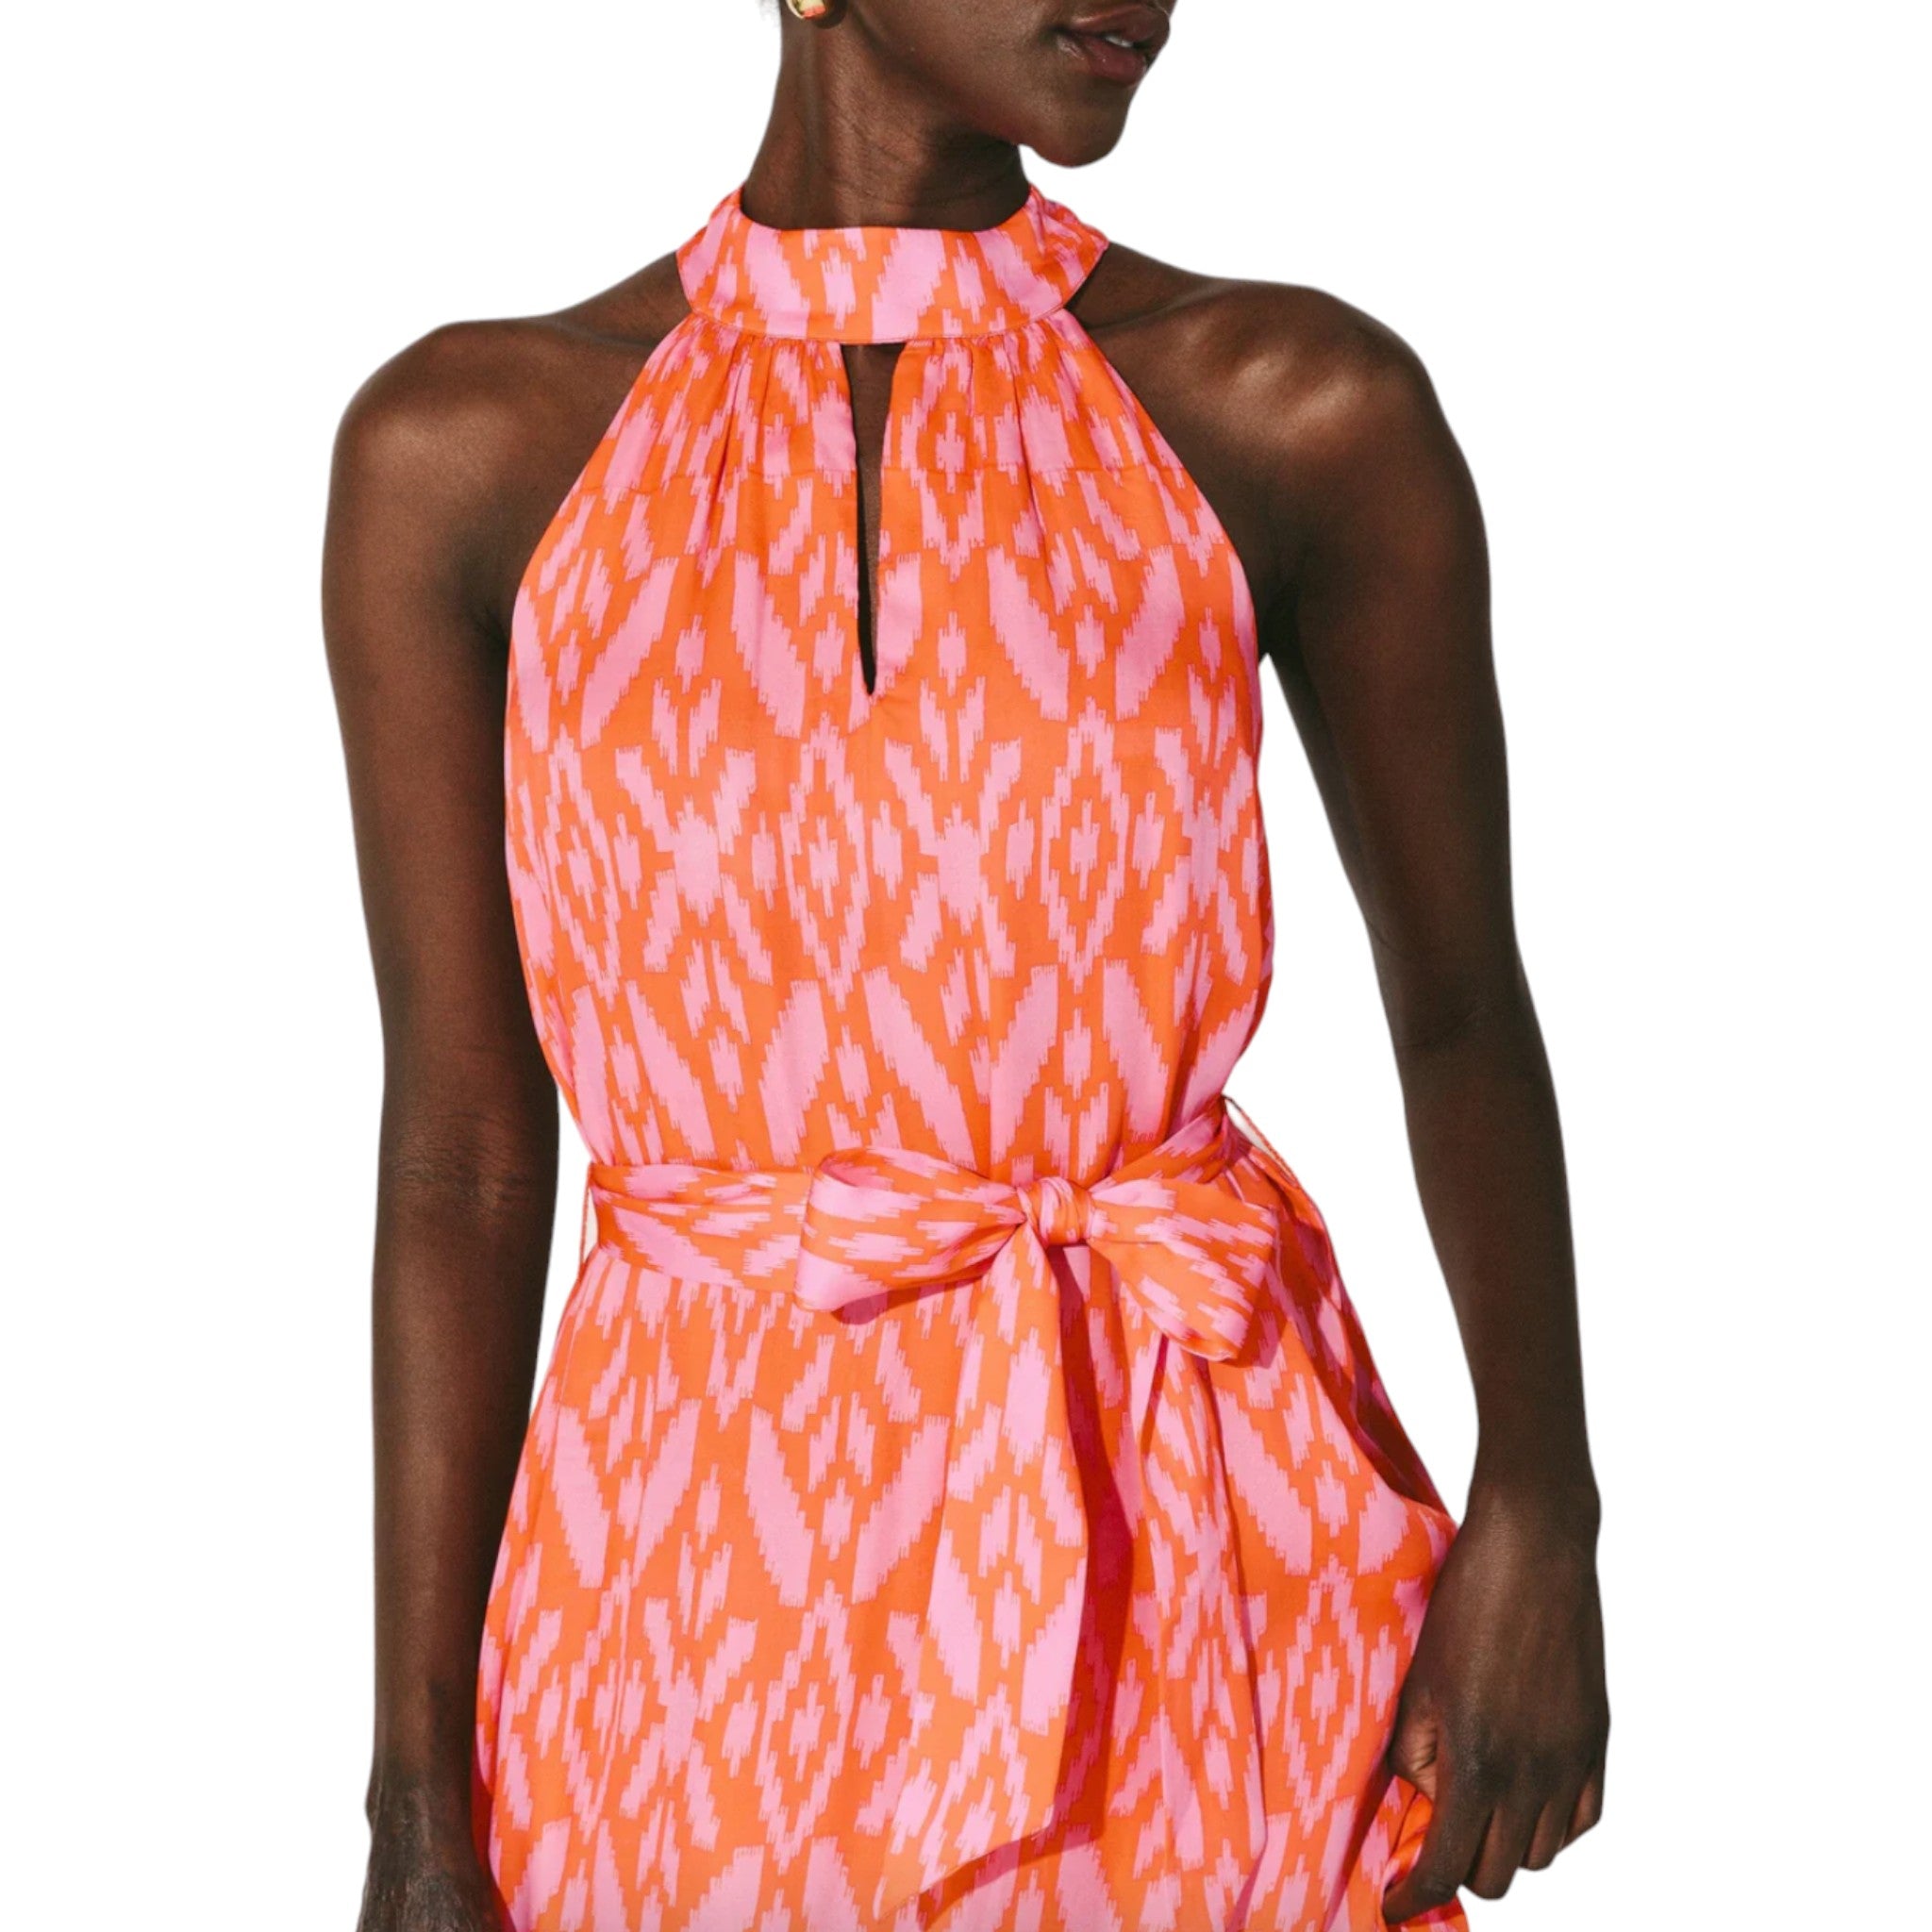 halter style maxi dress with a ruffle hem featuring a pink and orange ikat print with a keyhole cutout detail and tie neck and belted waist